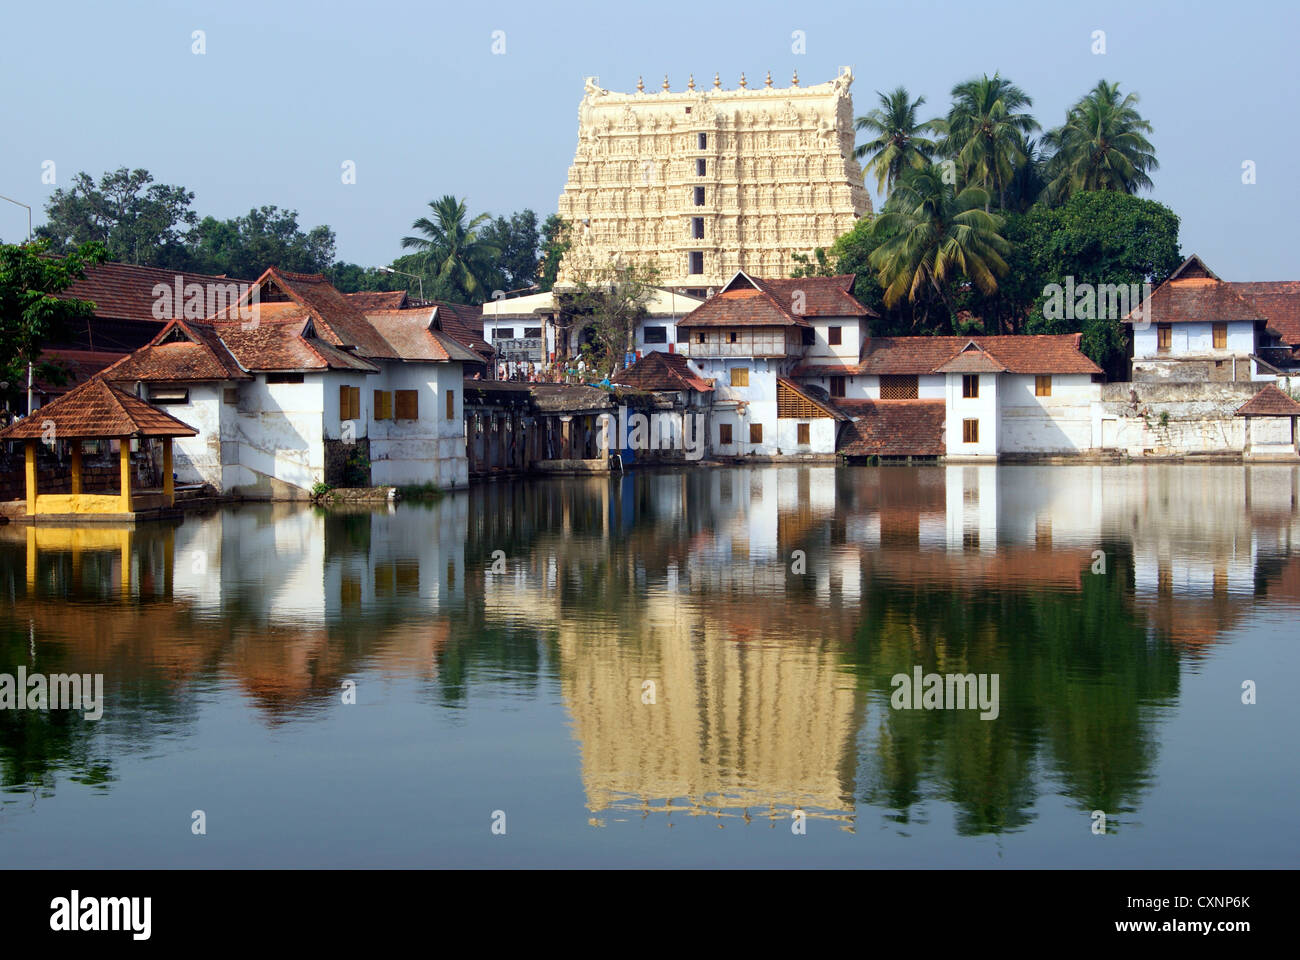 Sri Padmanabhaswamy Temple and Temples Pond on Ancient royal Temple buildings in water reflection scenery View at Kerala,India Stock Photo